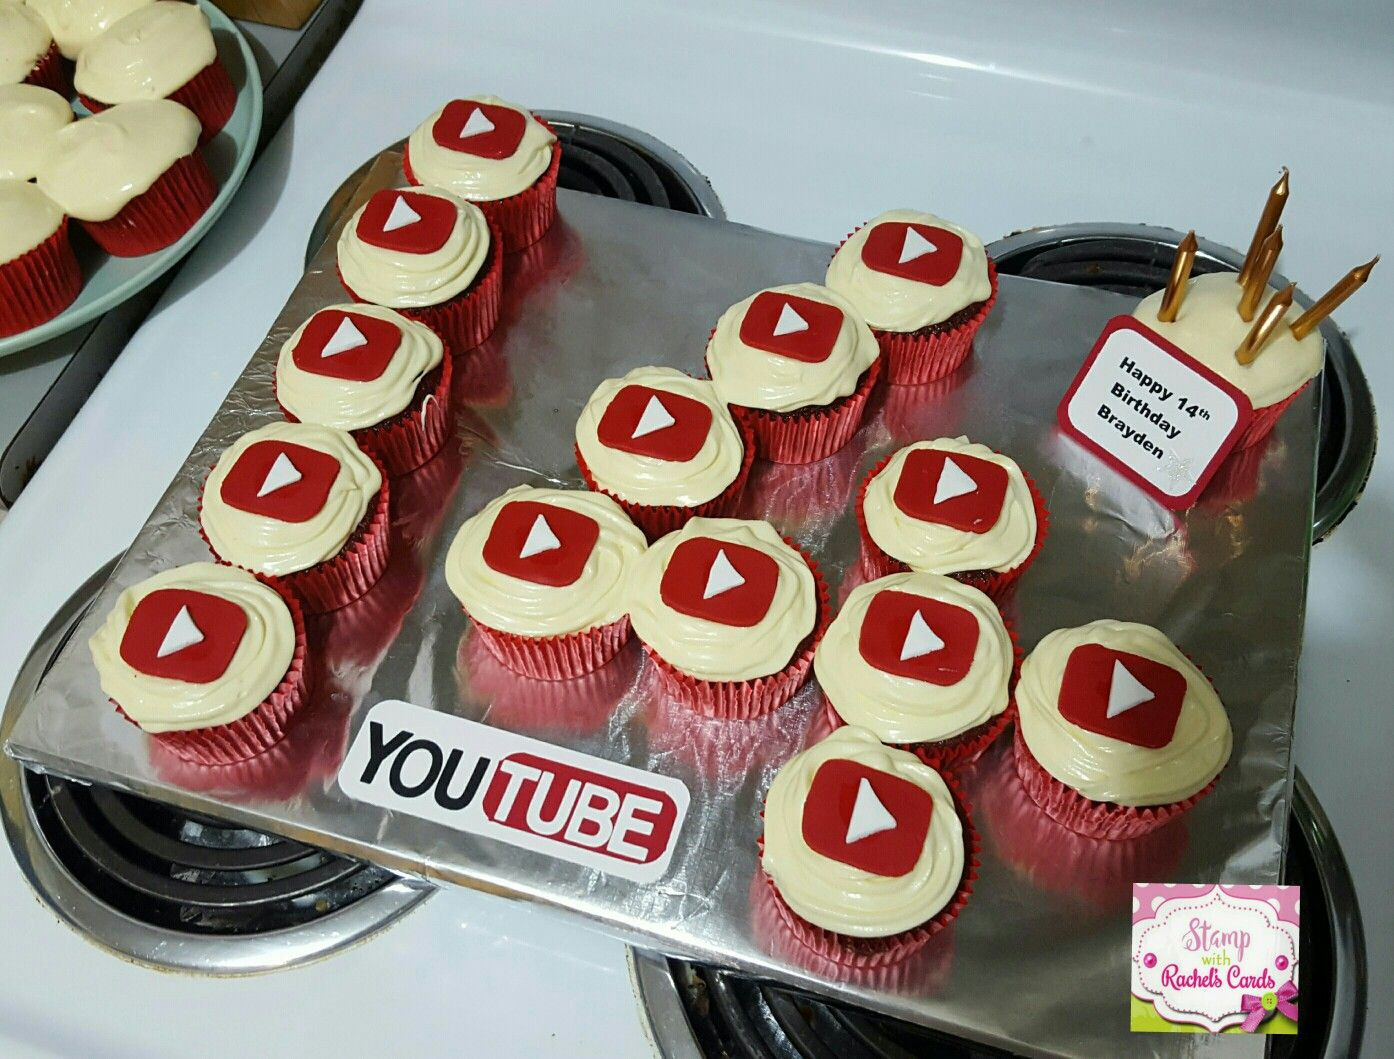 Youtube Birthday Cake
 The 14th Birthday cake i made for my You Tube obsessed son